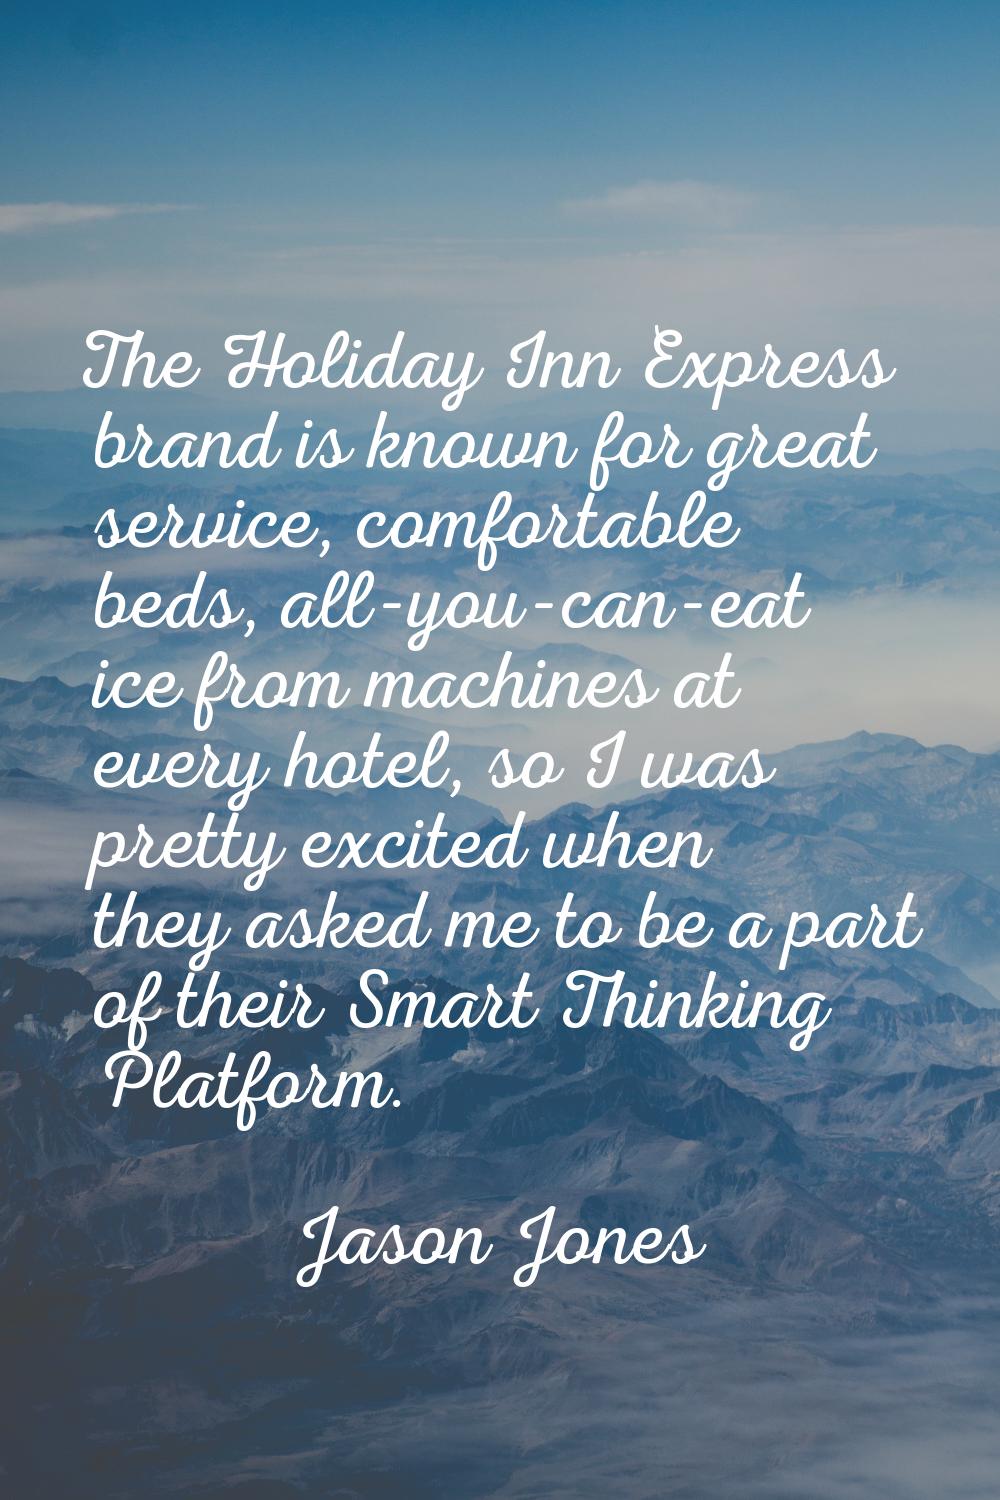 The Holiday Inn Express brand is known for great service, comfortable beds, all-you-can-eat ice fro